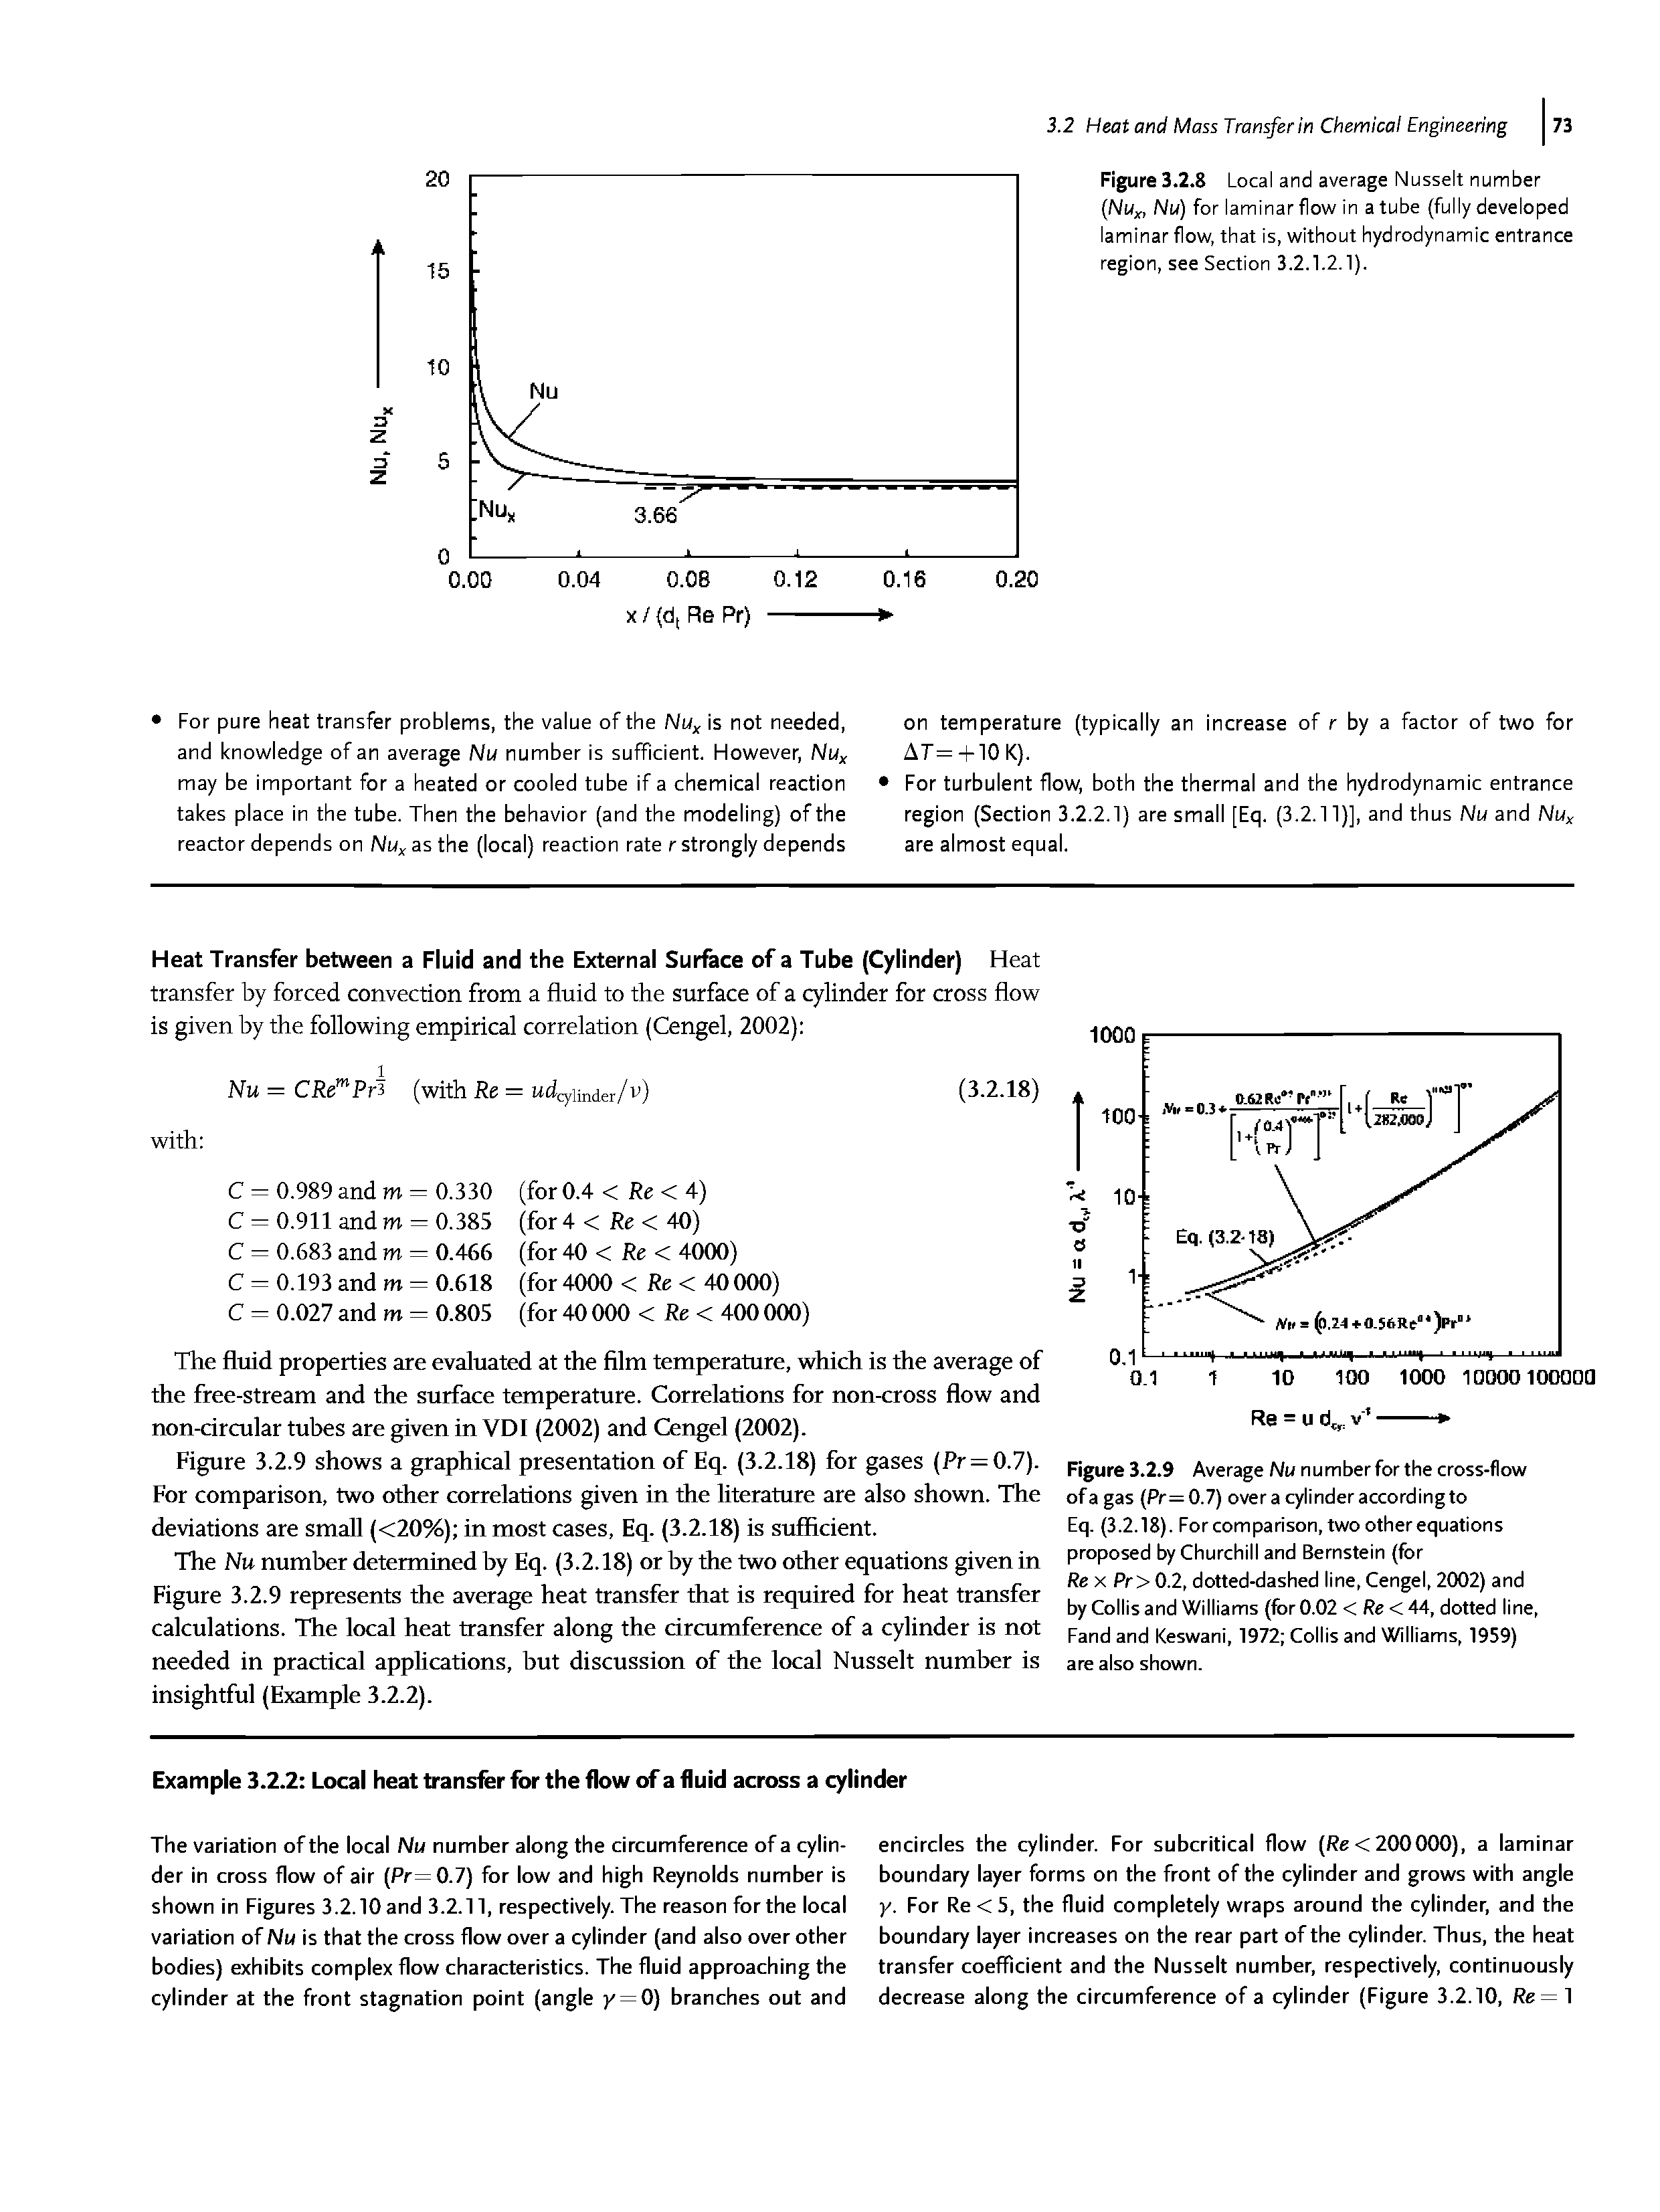 Figure 3.2.9 Average Nu number for the cross-flow of a gas (Pr= 0.7) over a cylinder according to Eq. (3.2.18). For comparison, two other equations proposed by Churchill and Bernstein (for Rex Pr>0.2,dotted-dashed line,Cengel,2002) and by Collis and Williams (for 0.02 < Re < 44, dotted line,...